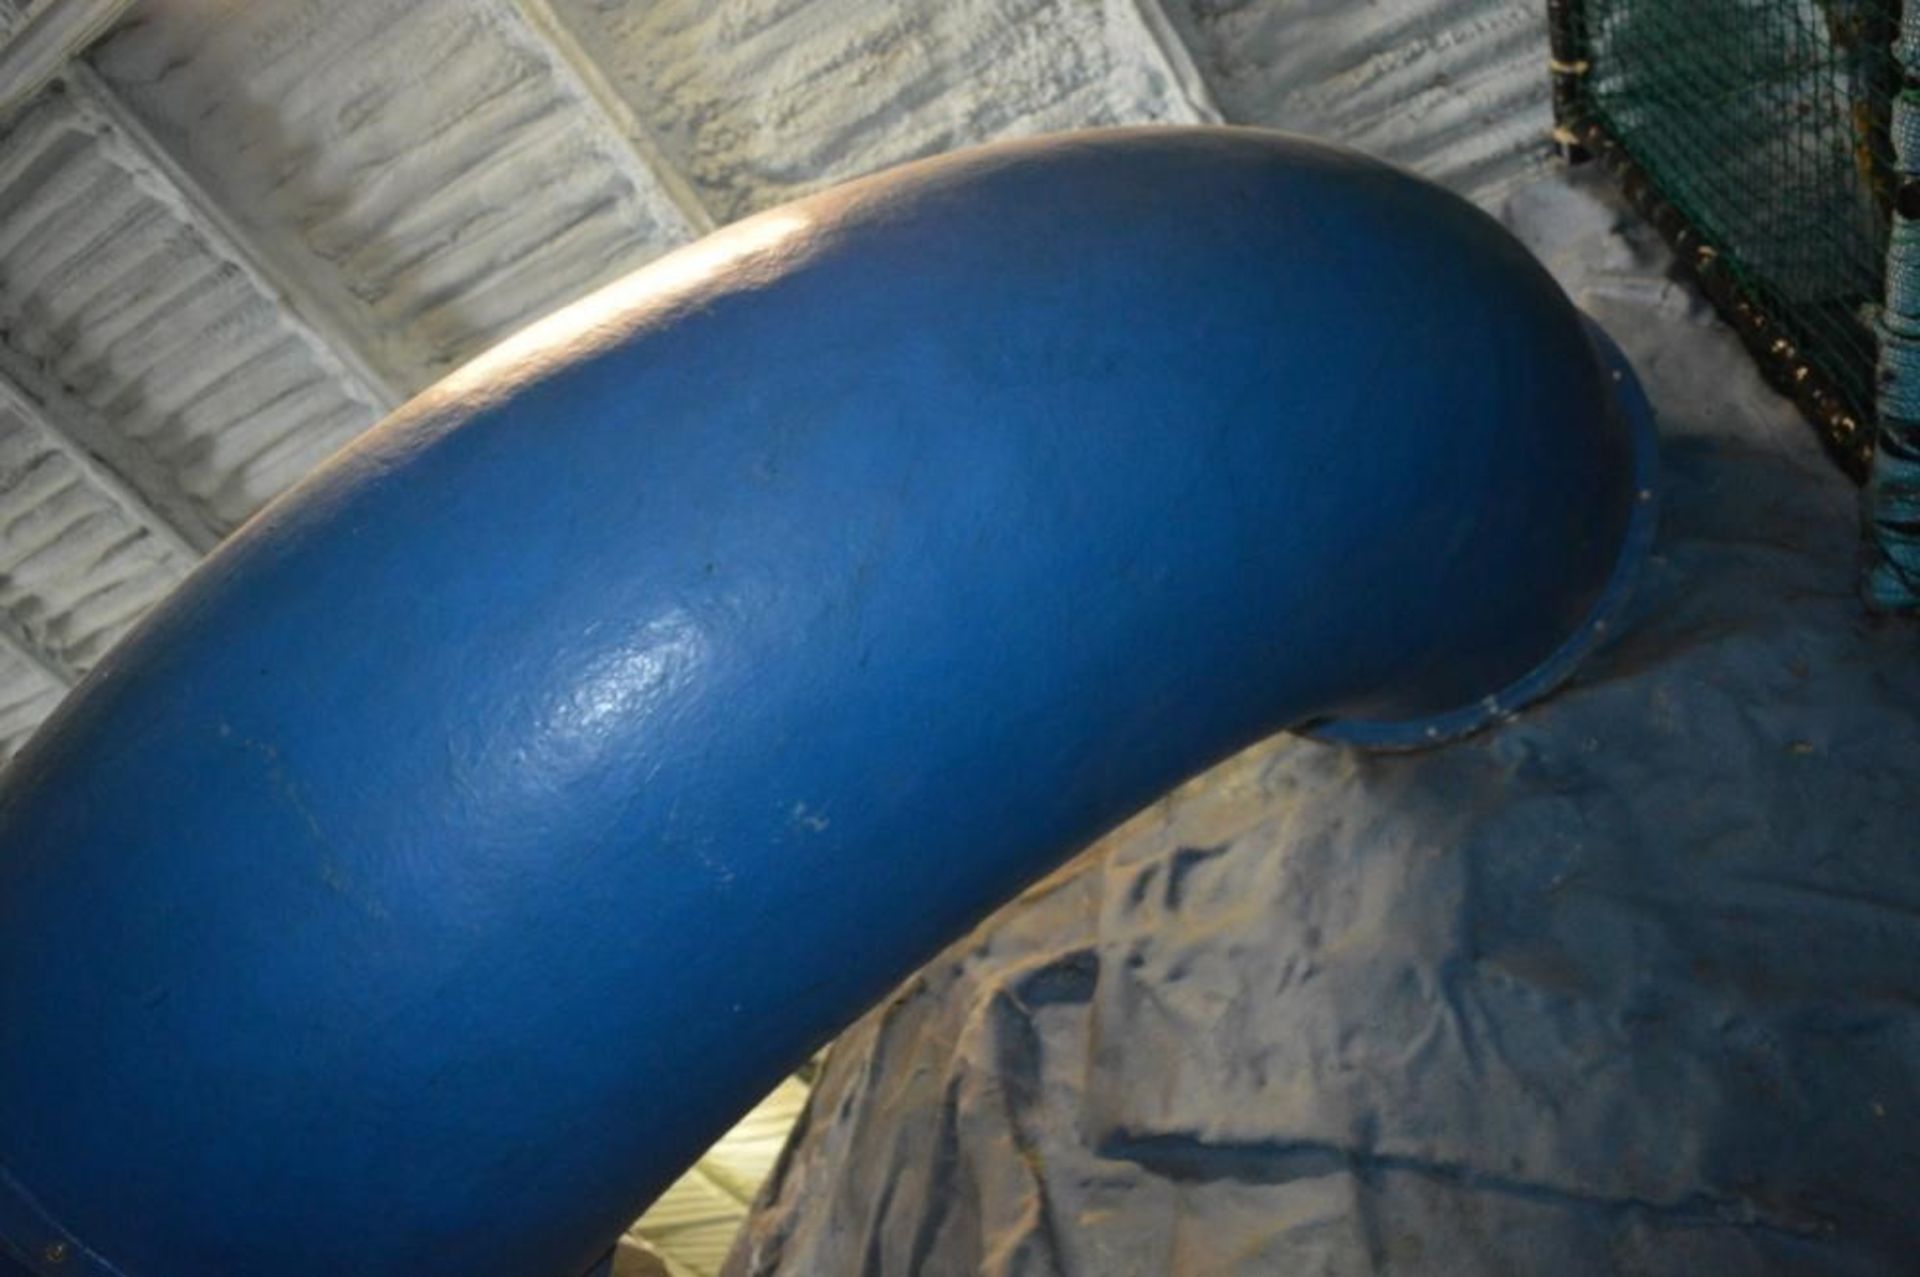 1 x Childrens Playcentre Tunnel Tube Slide in Blue - Very Good Condition - Ref PTP - CL351 - - Image 2 of 3